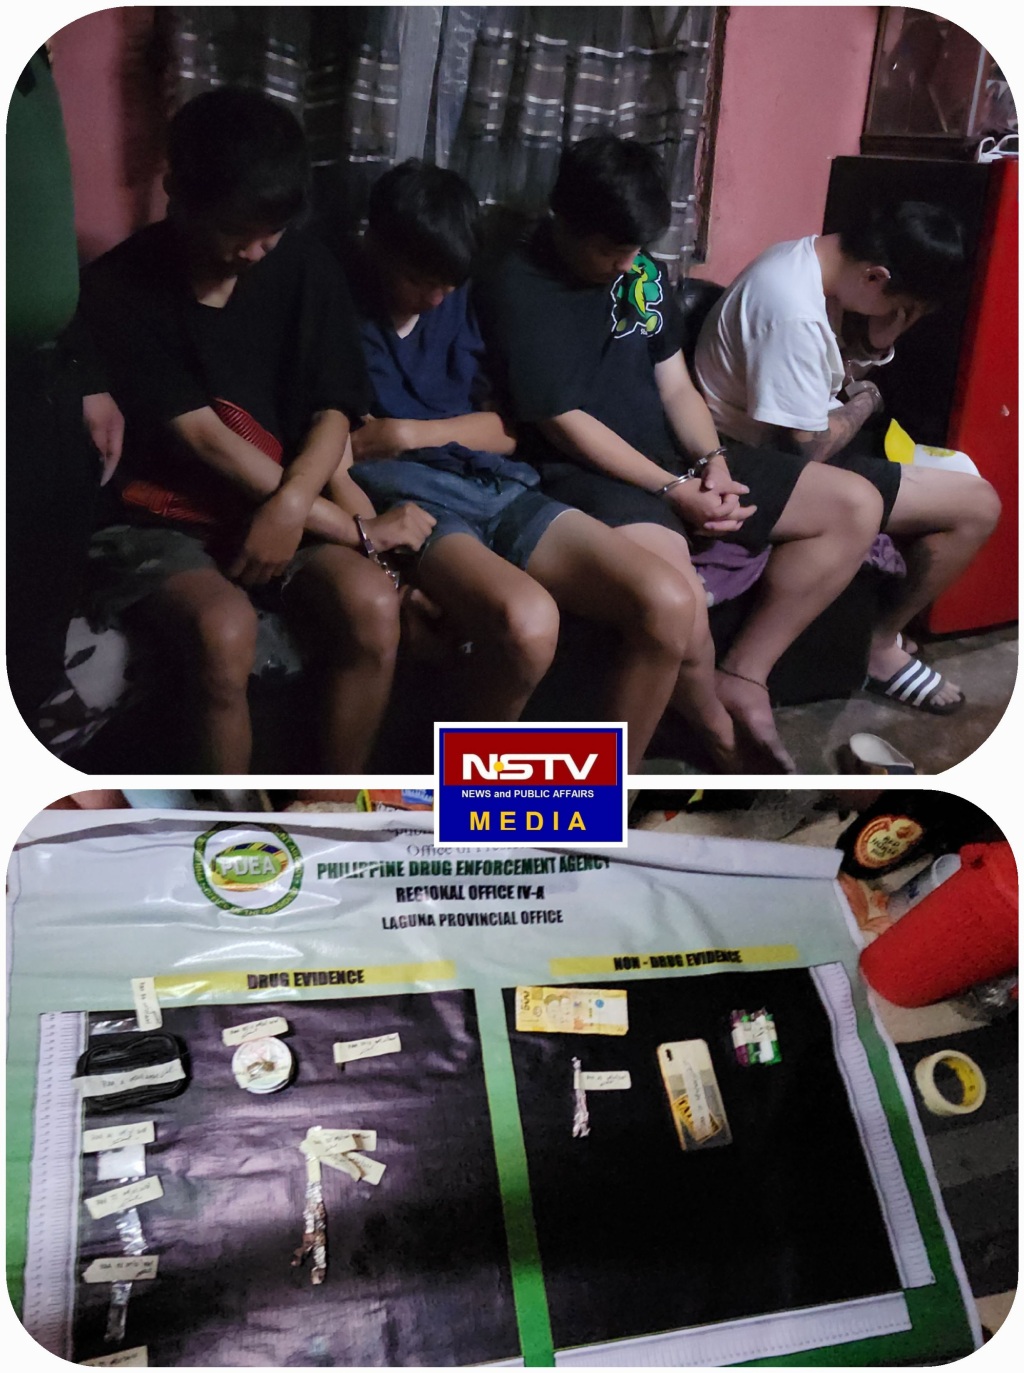 Drug Den Dismantled in Calamba City Following Buy-Bust Operation, Target at-large 4 arrested